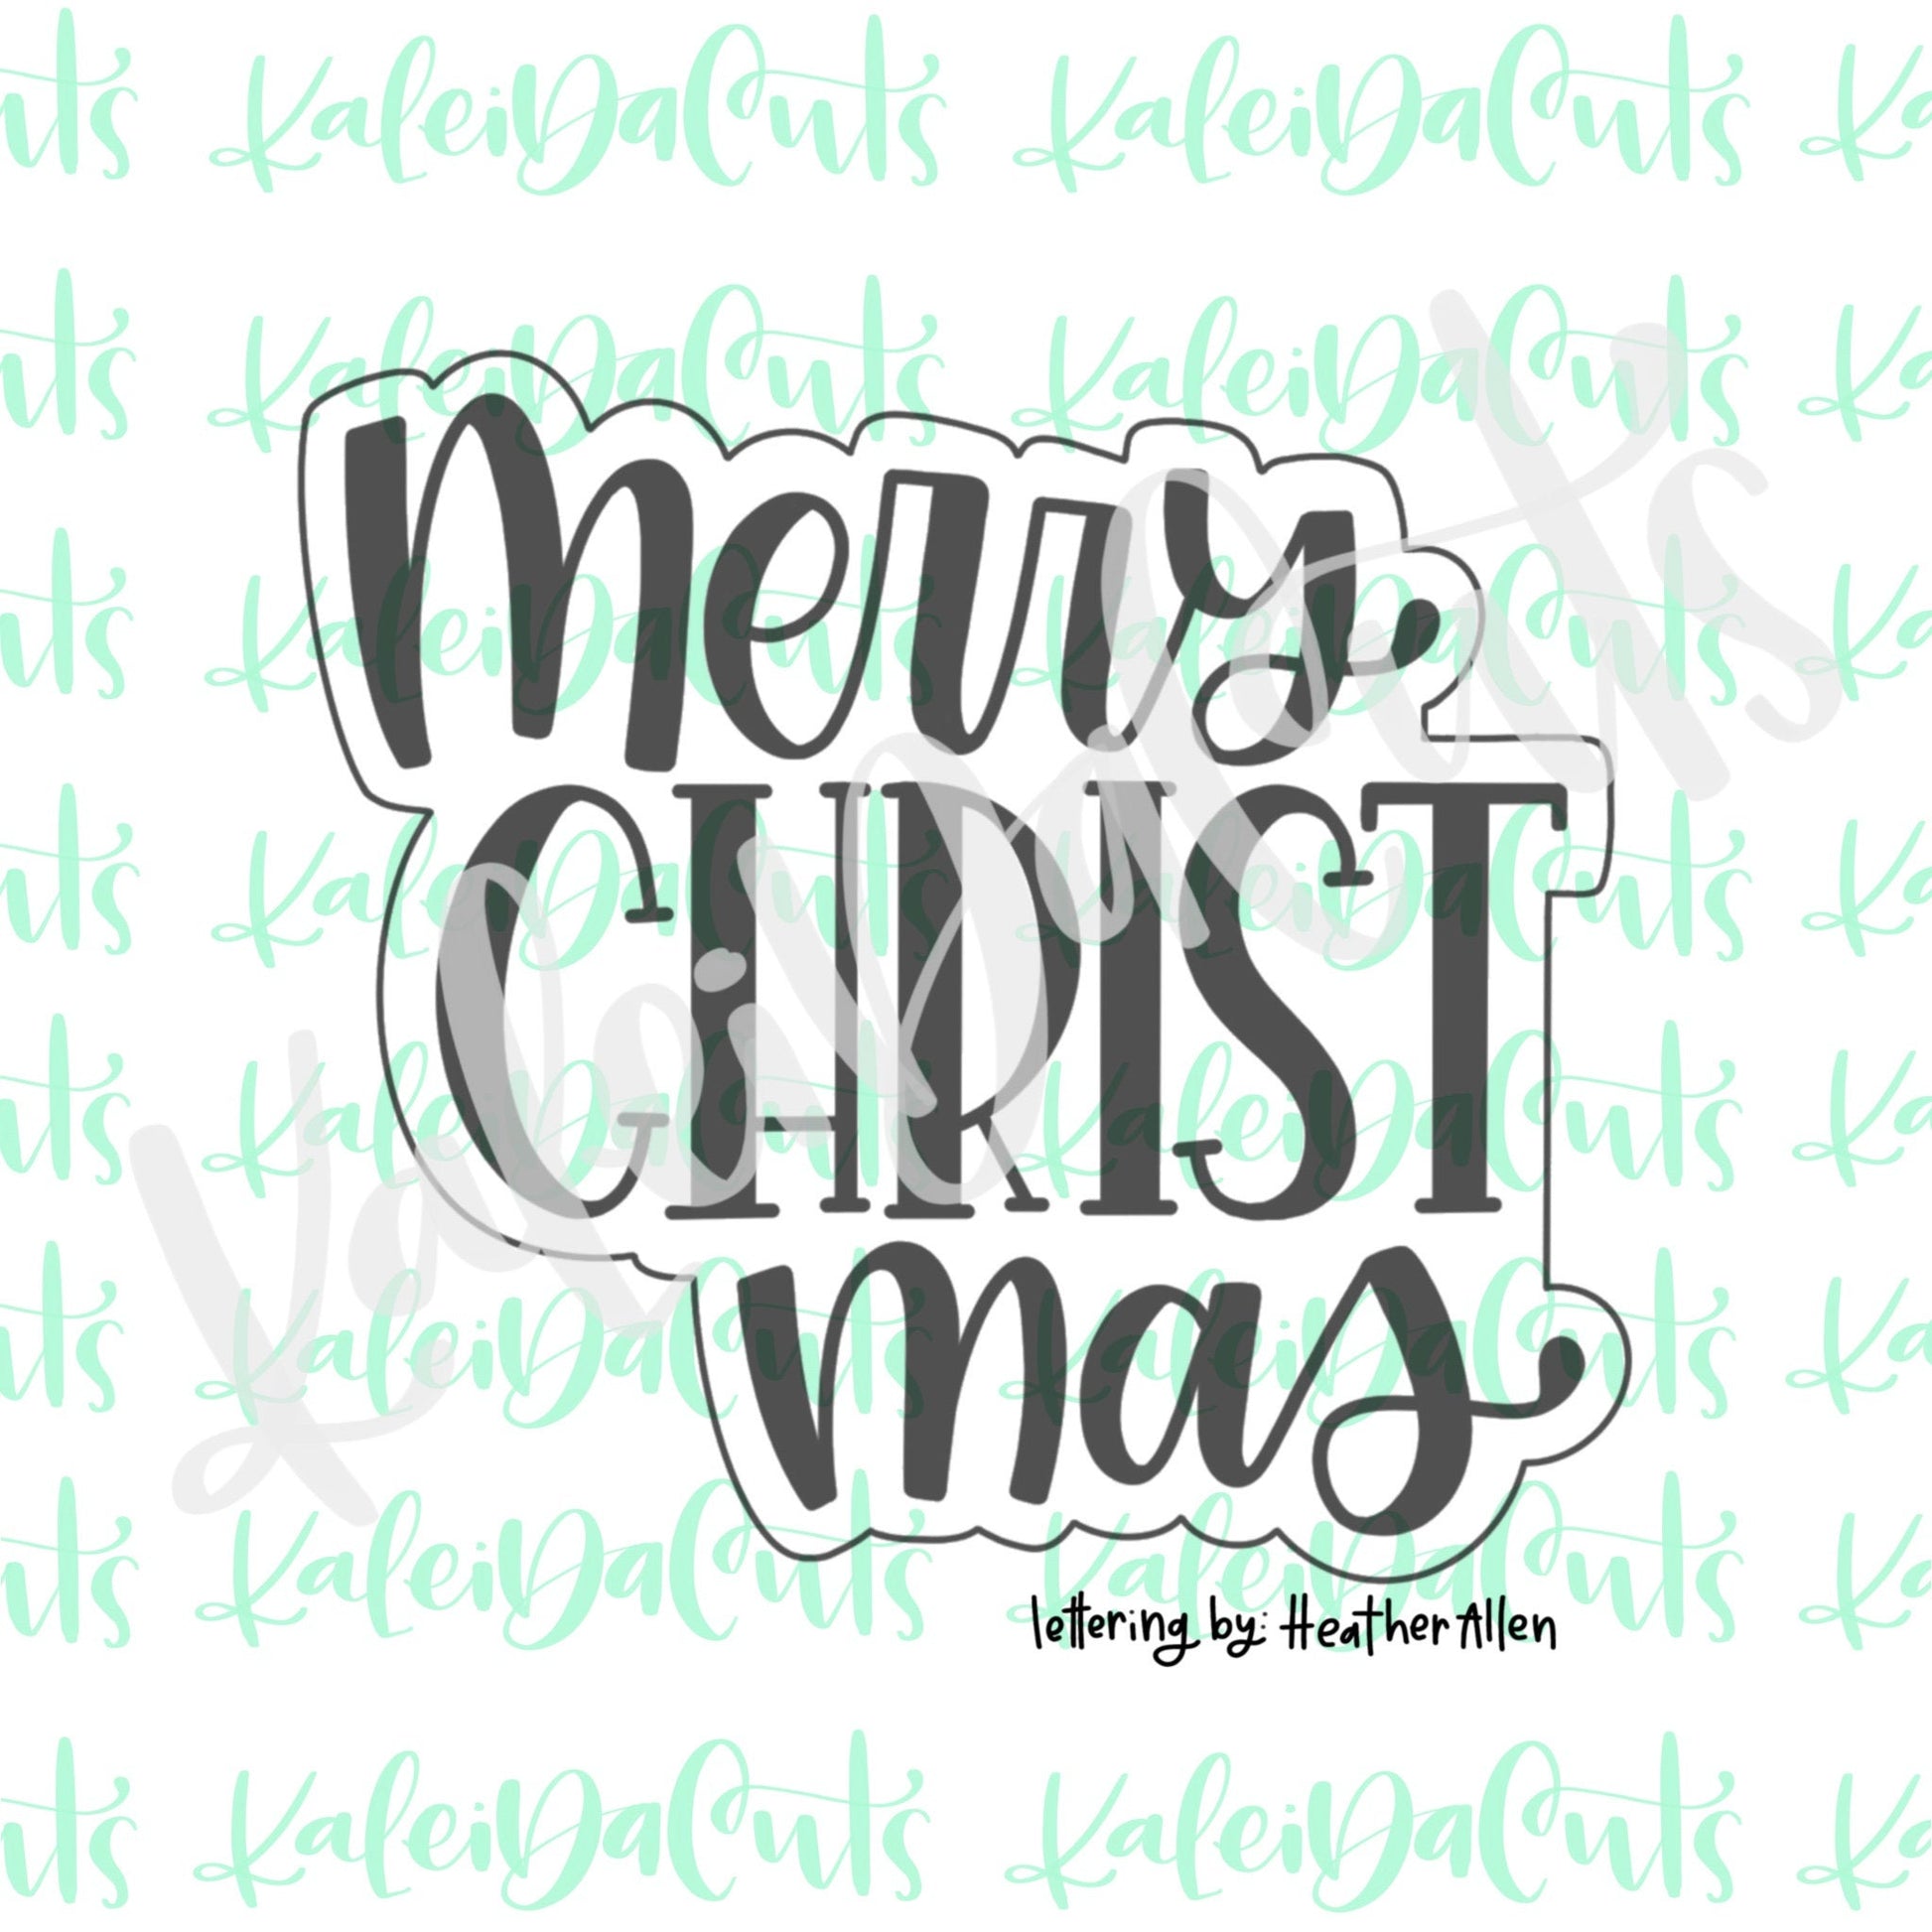 Merry Christ Mas Lettering Cookie Cutter